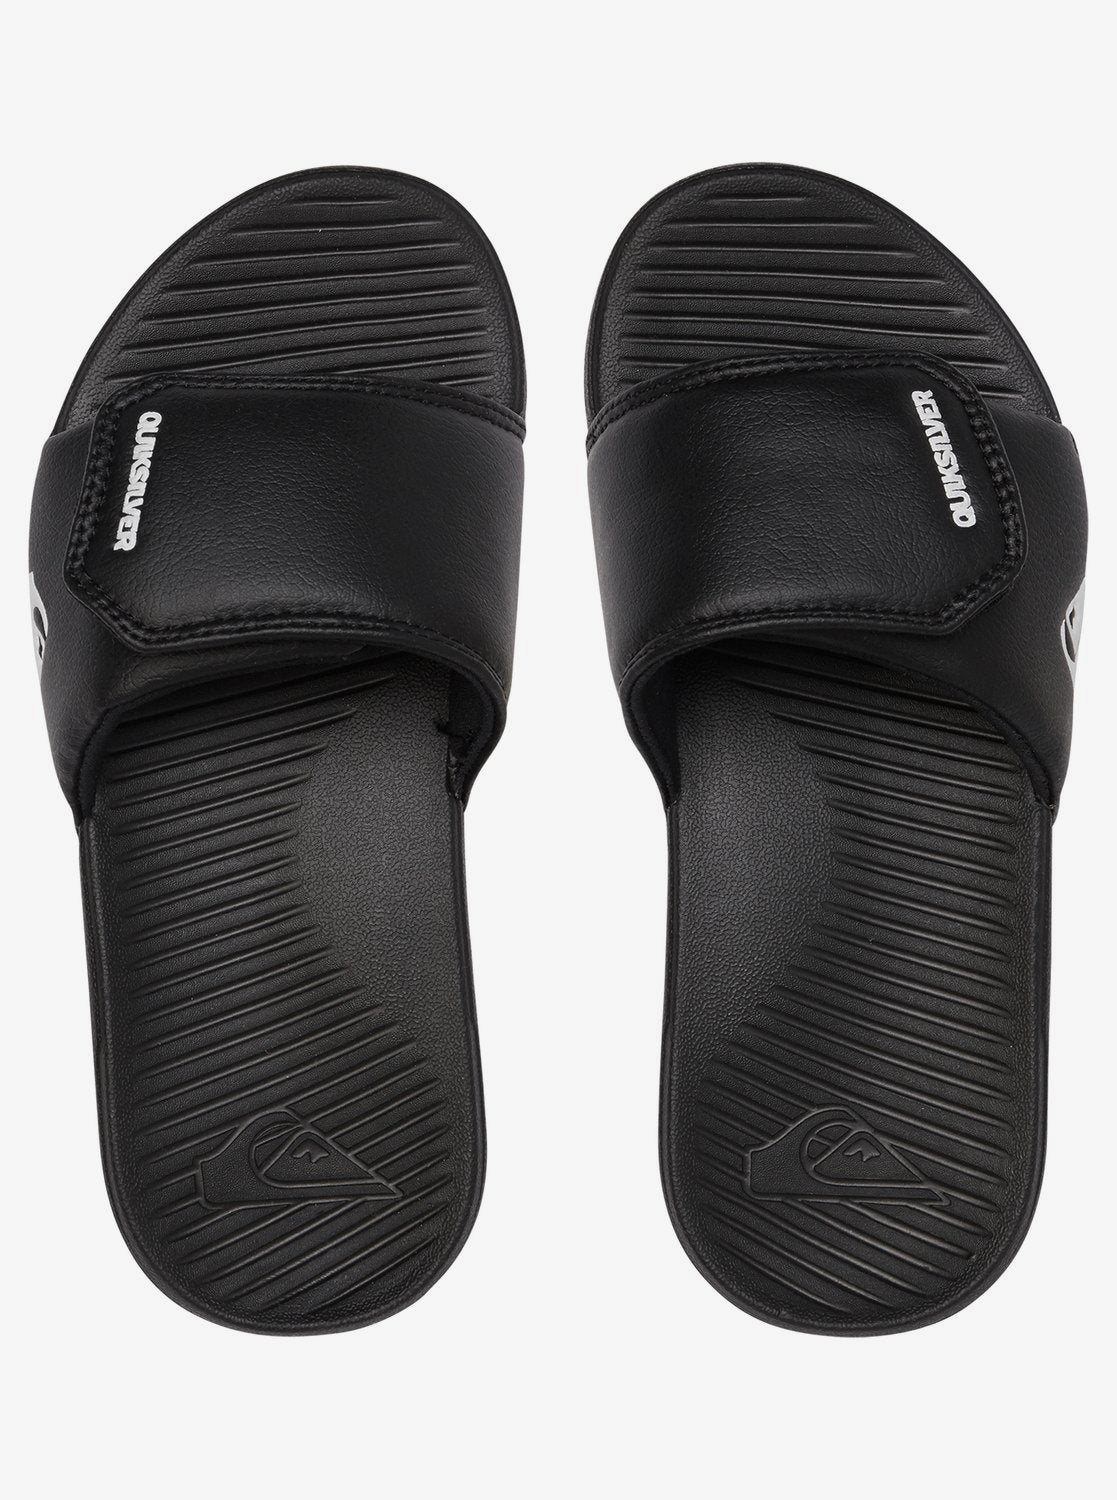 Quiksilver Boys' Bright Coast Adjustable Sandals - Mountain Kids Outfitters: Black Color - White Background  top view